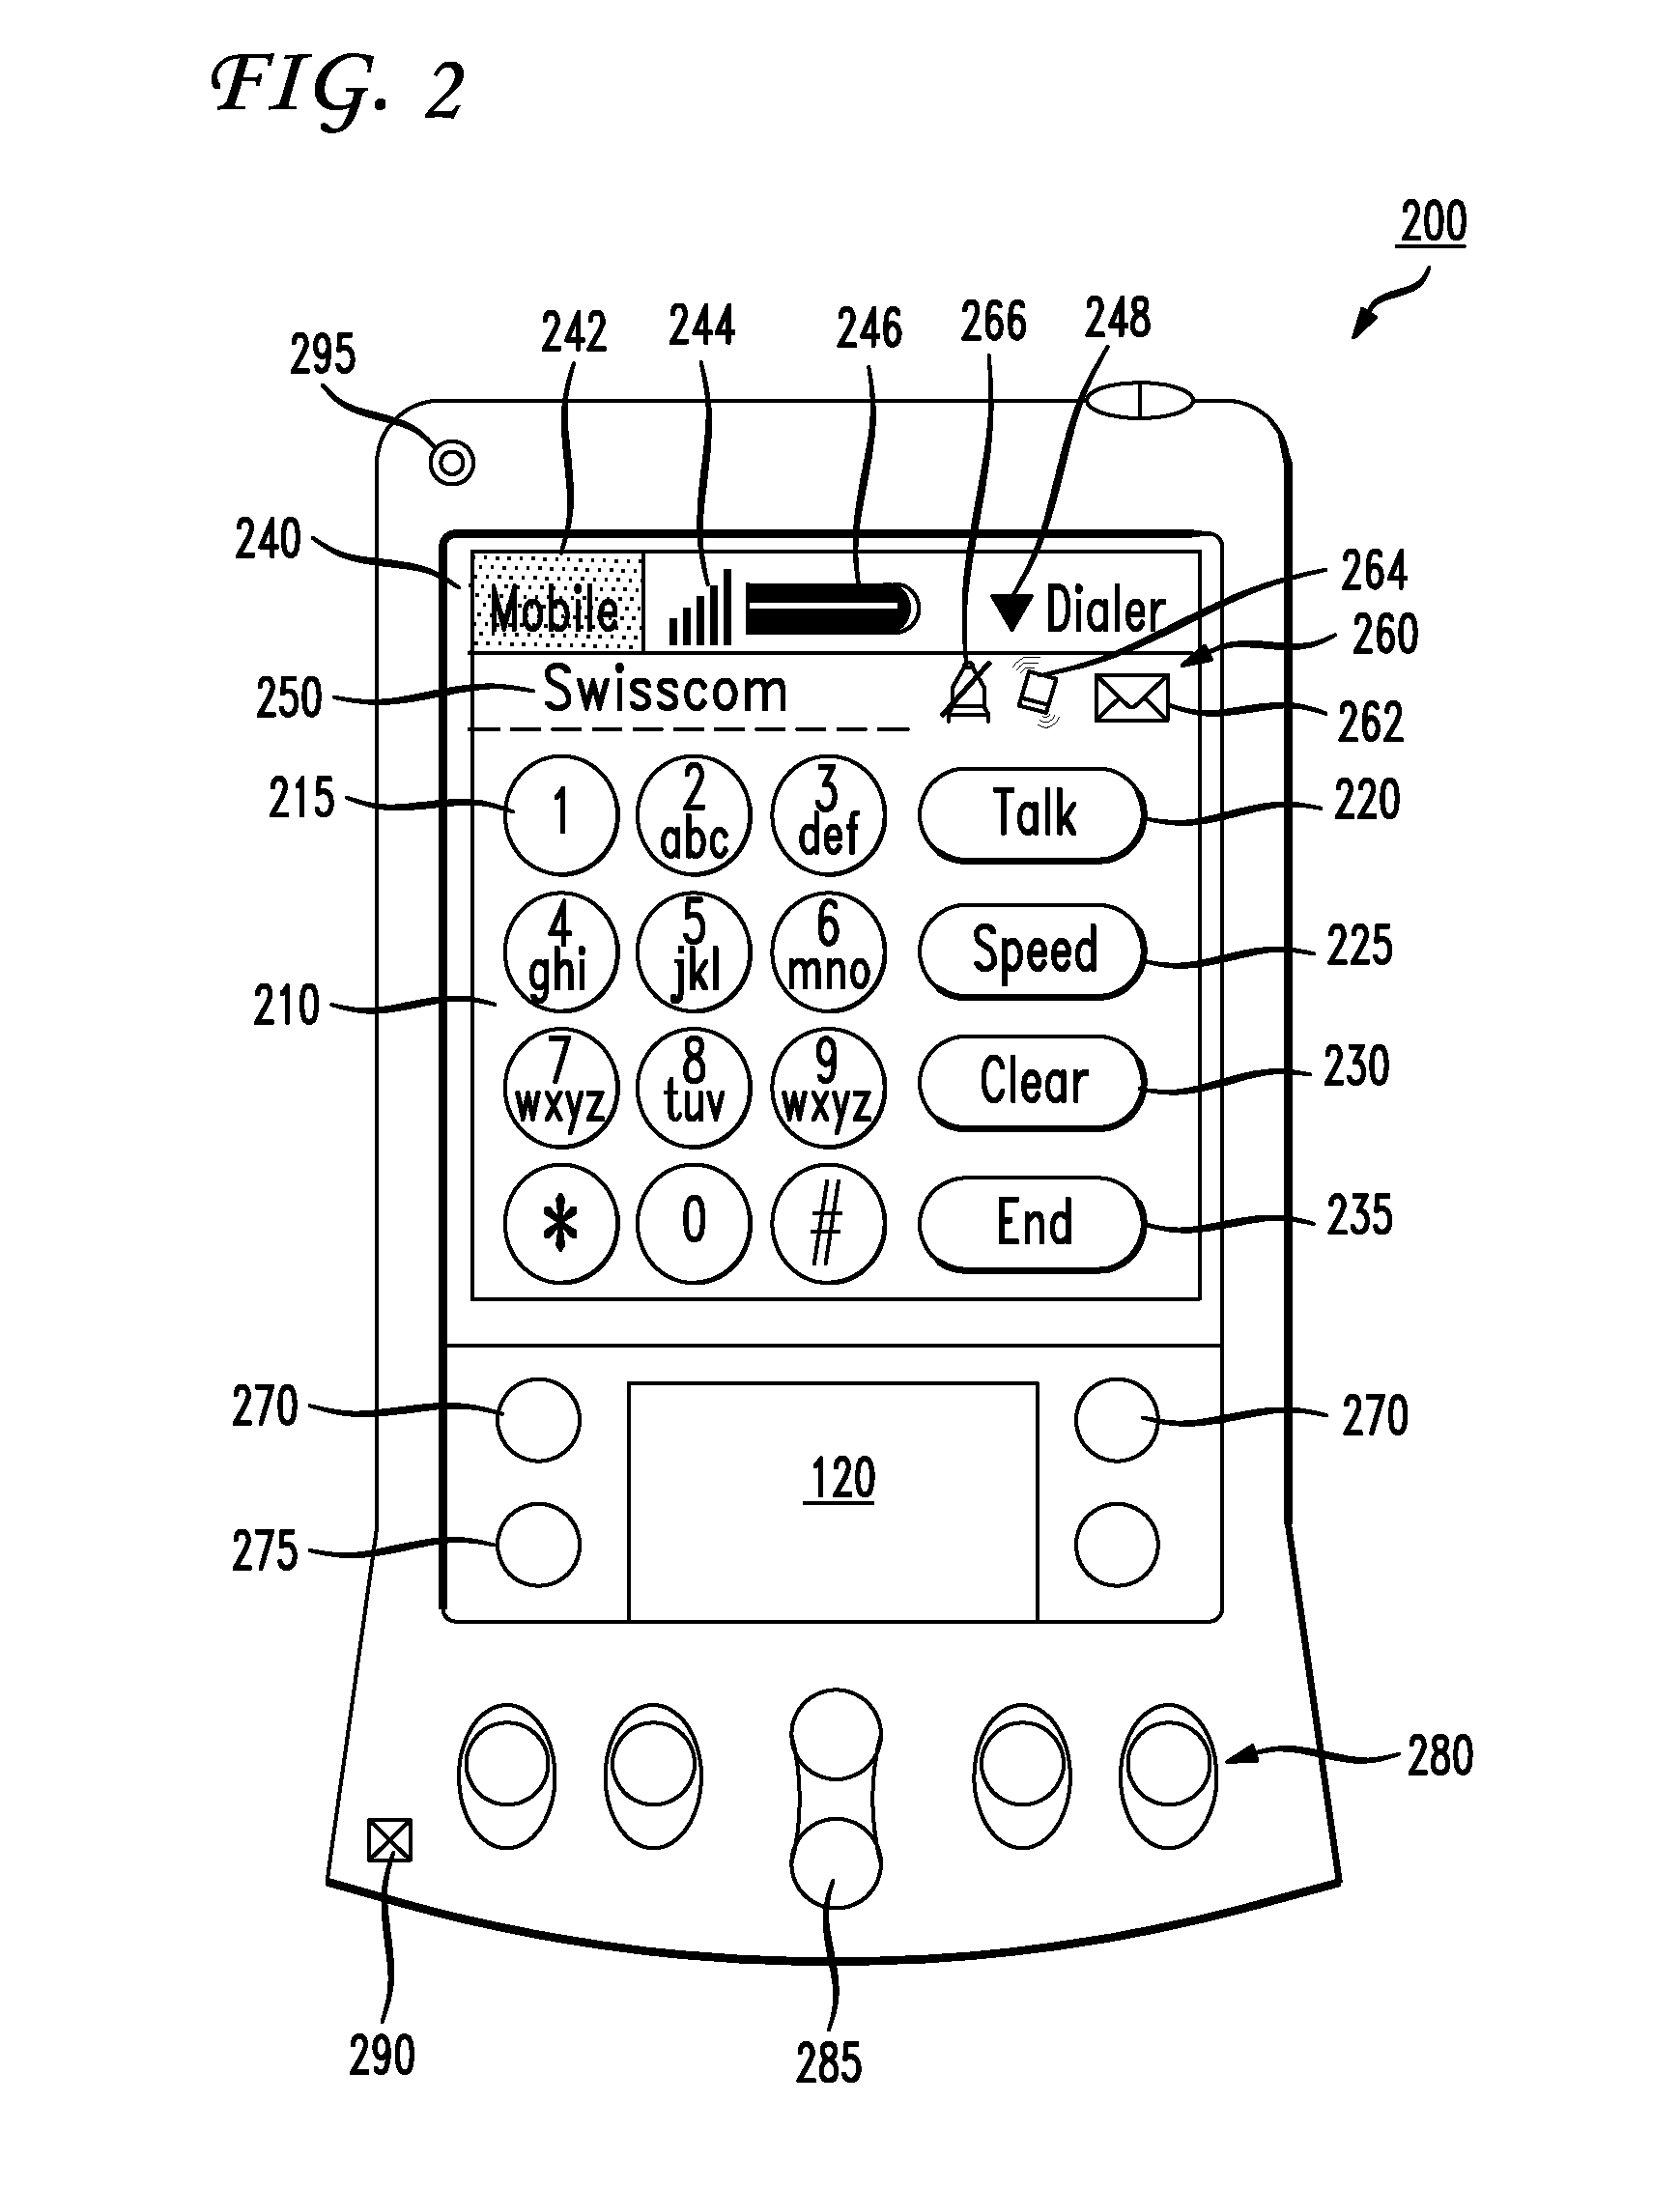 Intelligent dialing scheme for telephony application